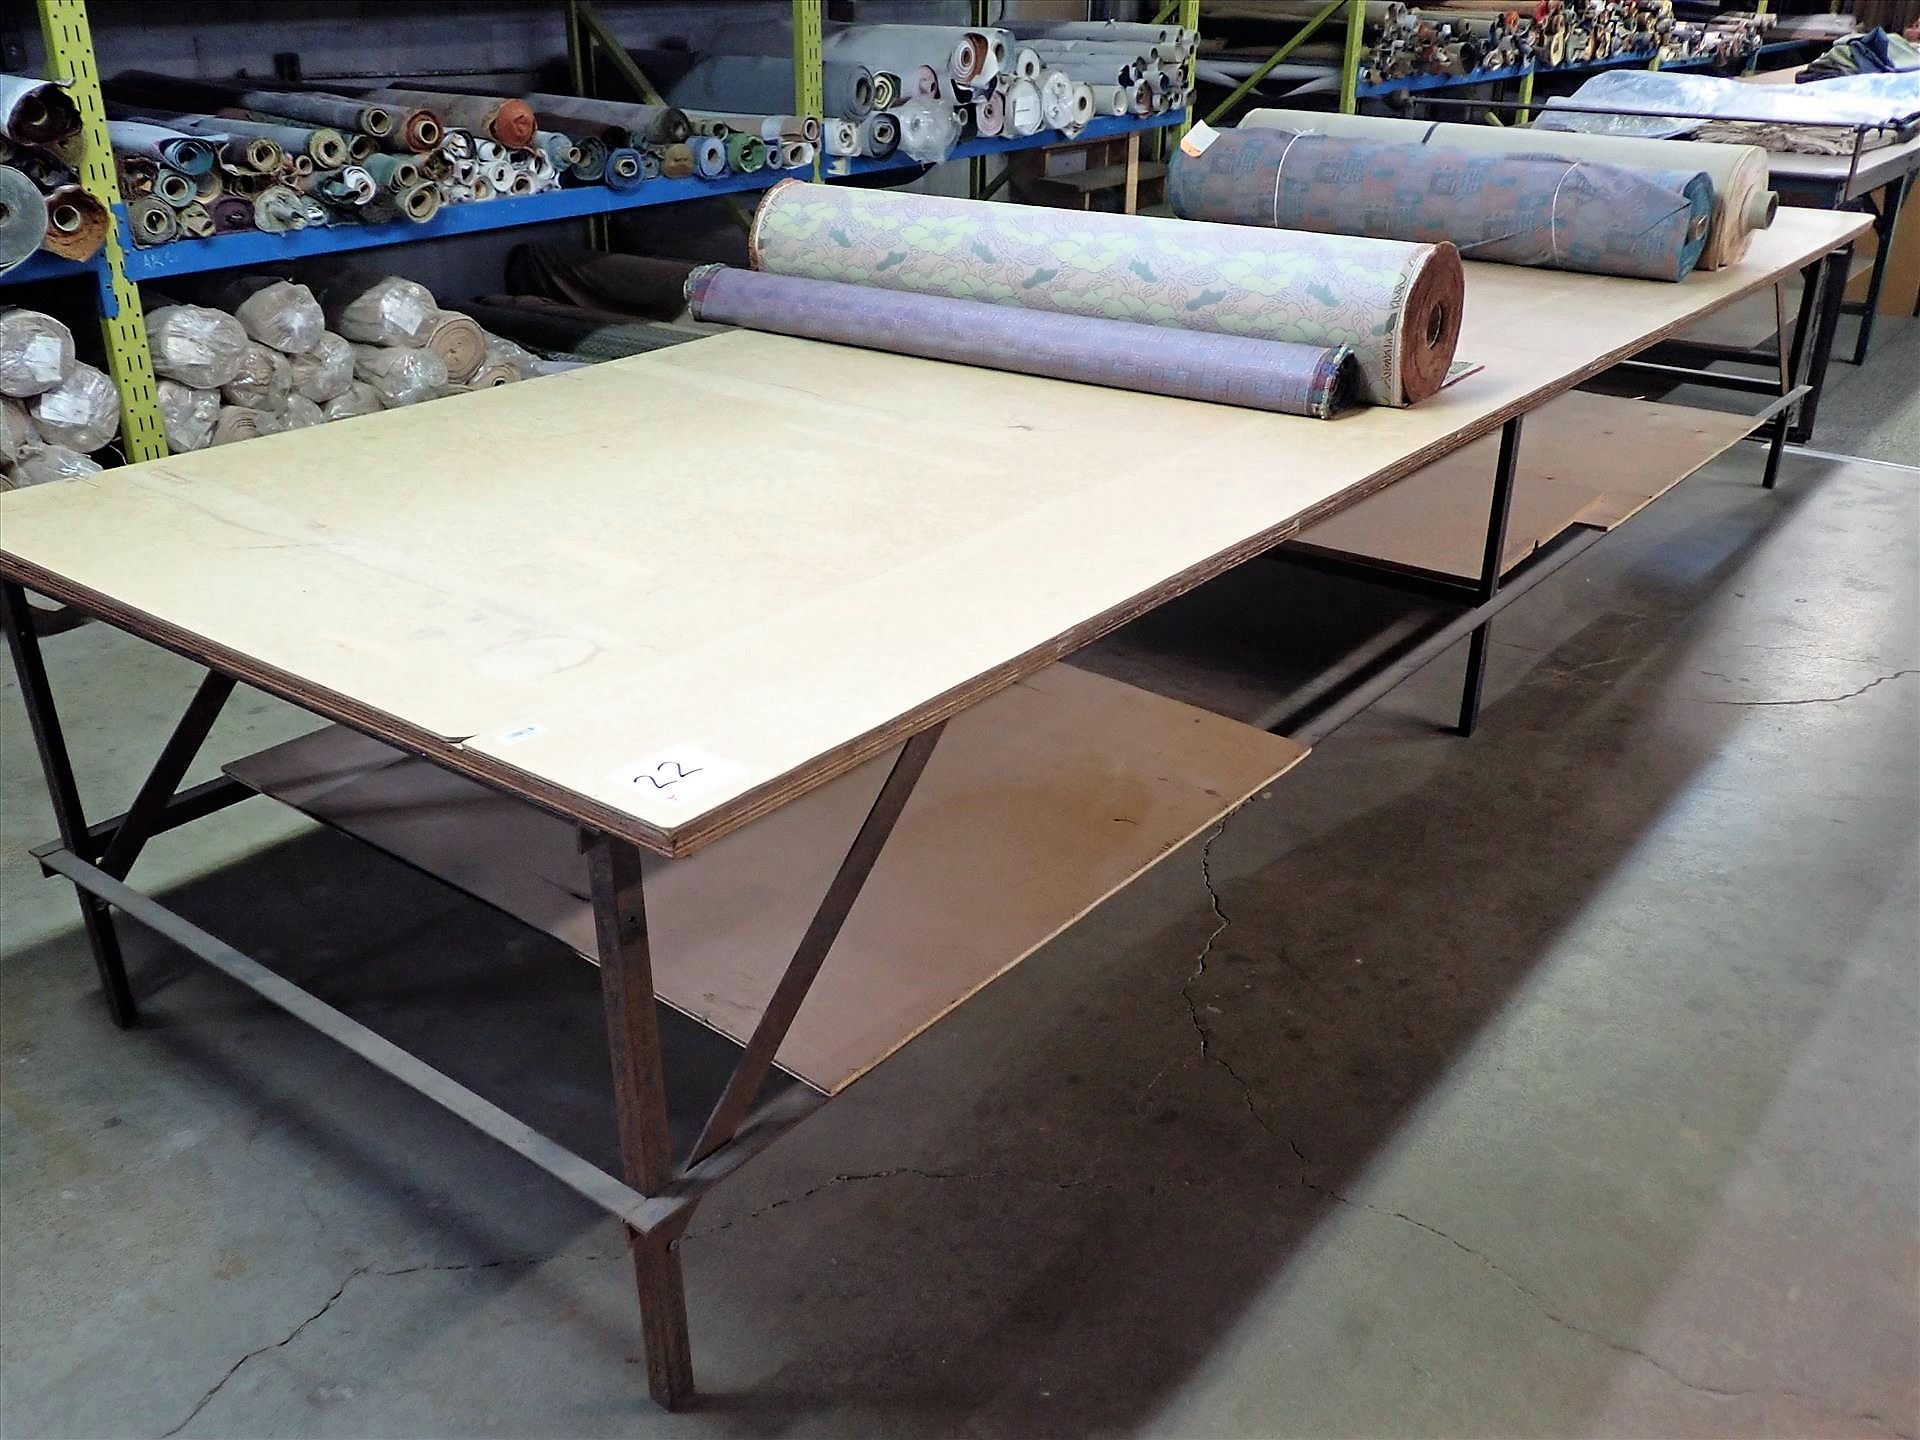 Fabric lay-out/spreading/cutting table, 60 in. x 16 ft